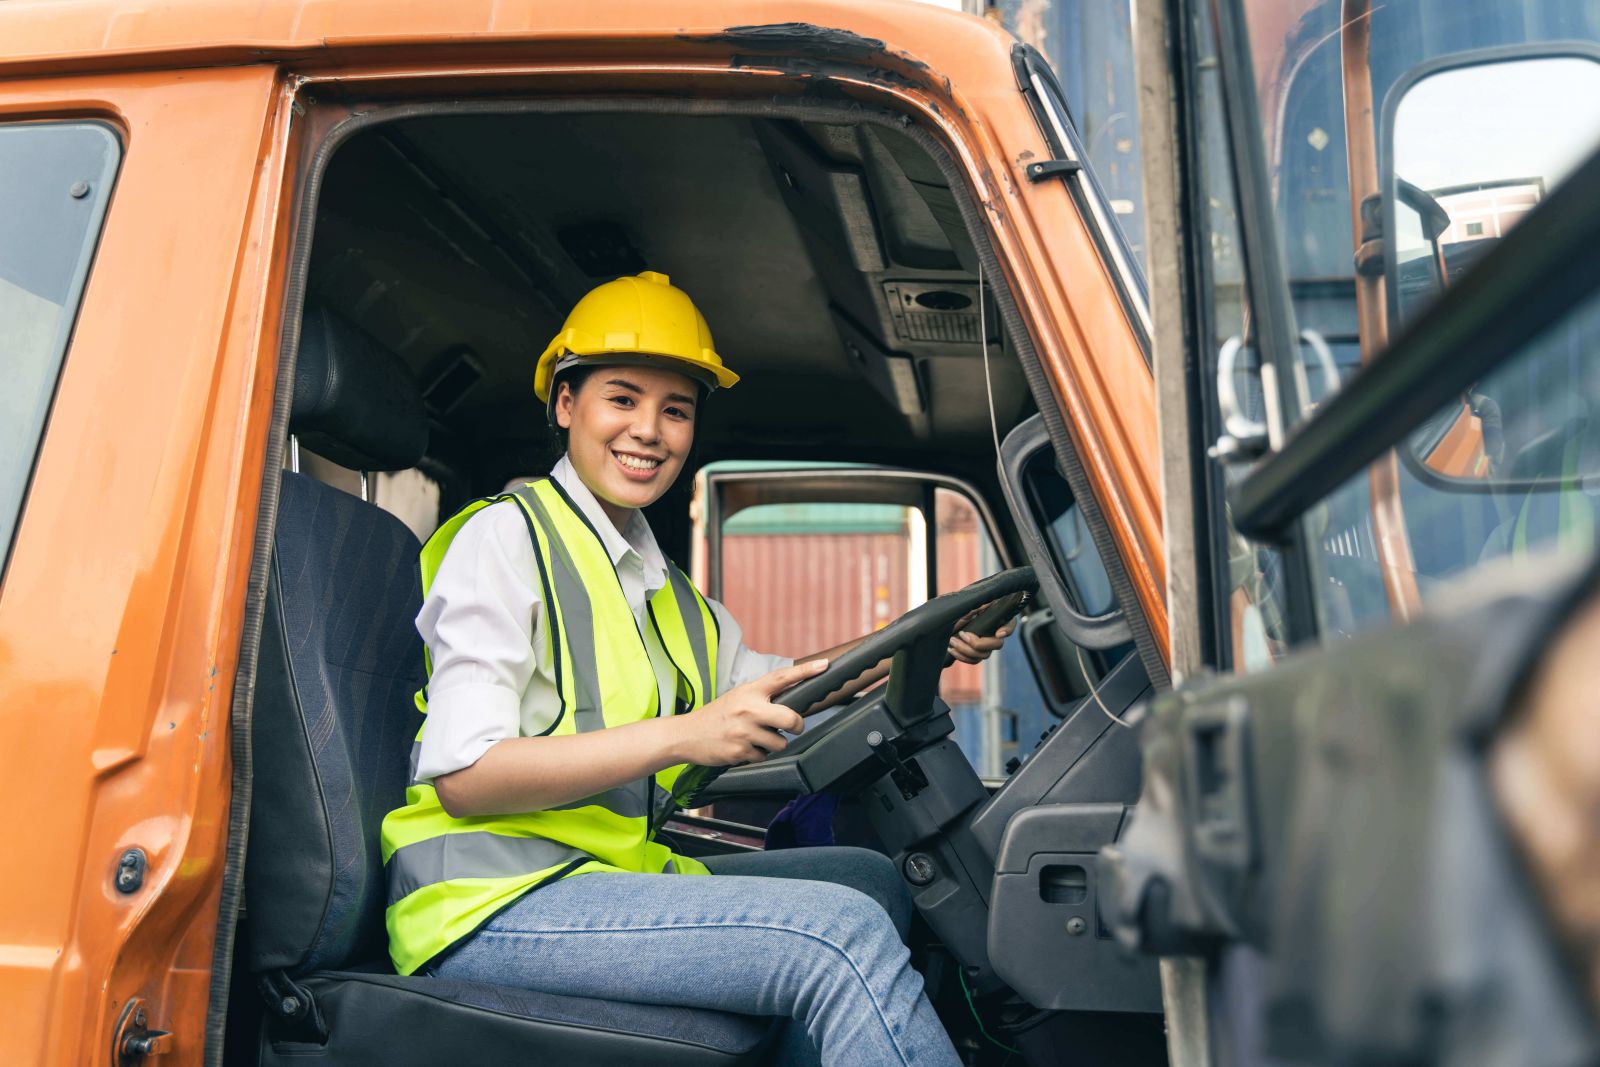 Woman with hard had on in truck smiling